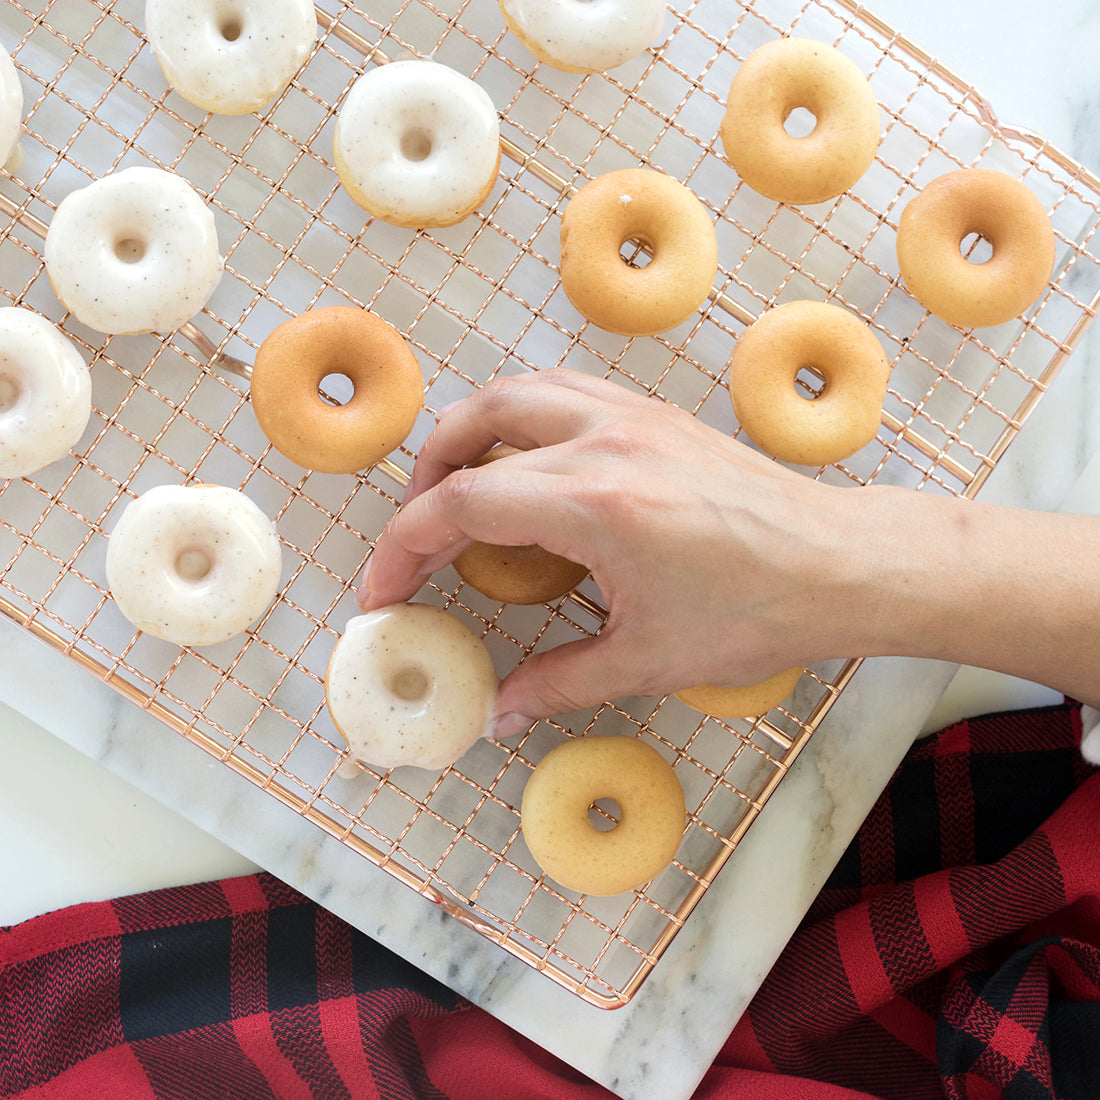 Image of a hand putting down glazed Miss Jones Baking Co Easy Holiday Eggnog Mini Donuts onto a copper baking rack